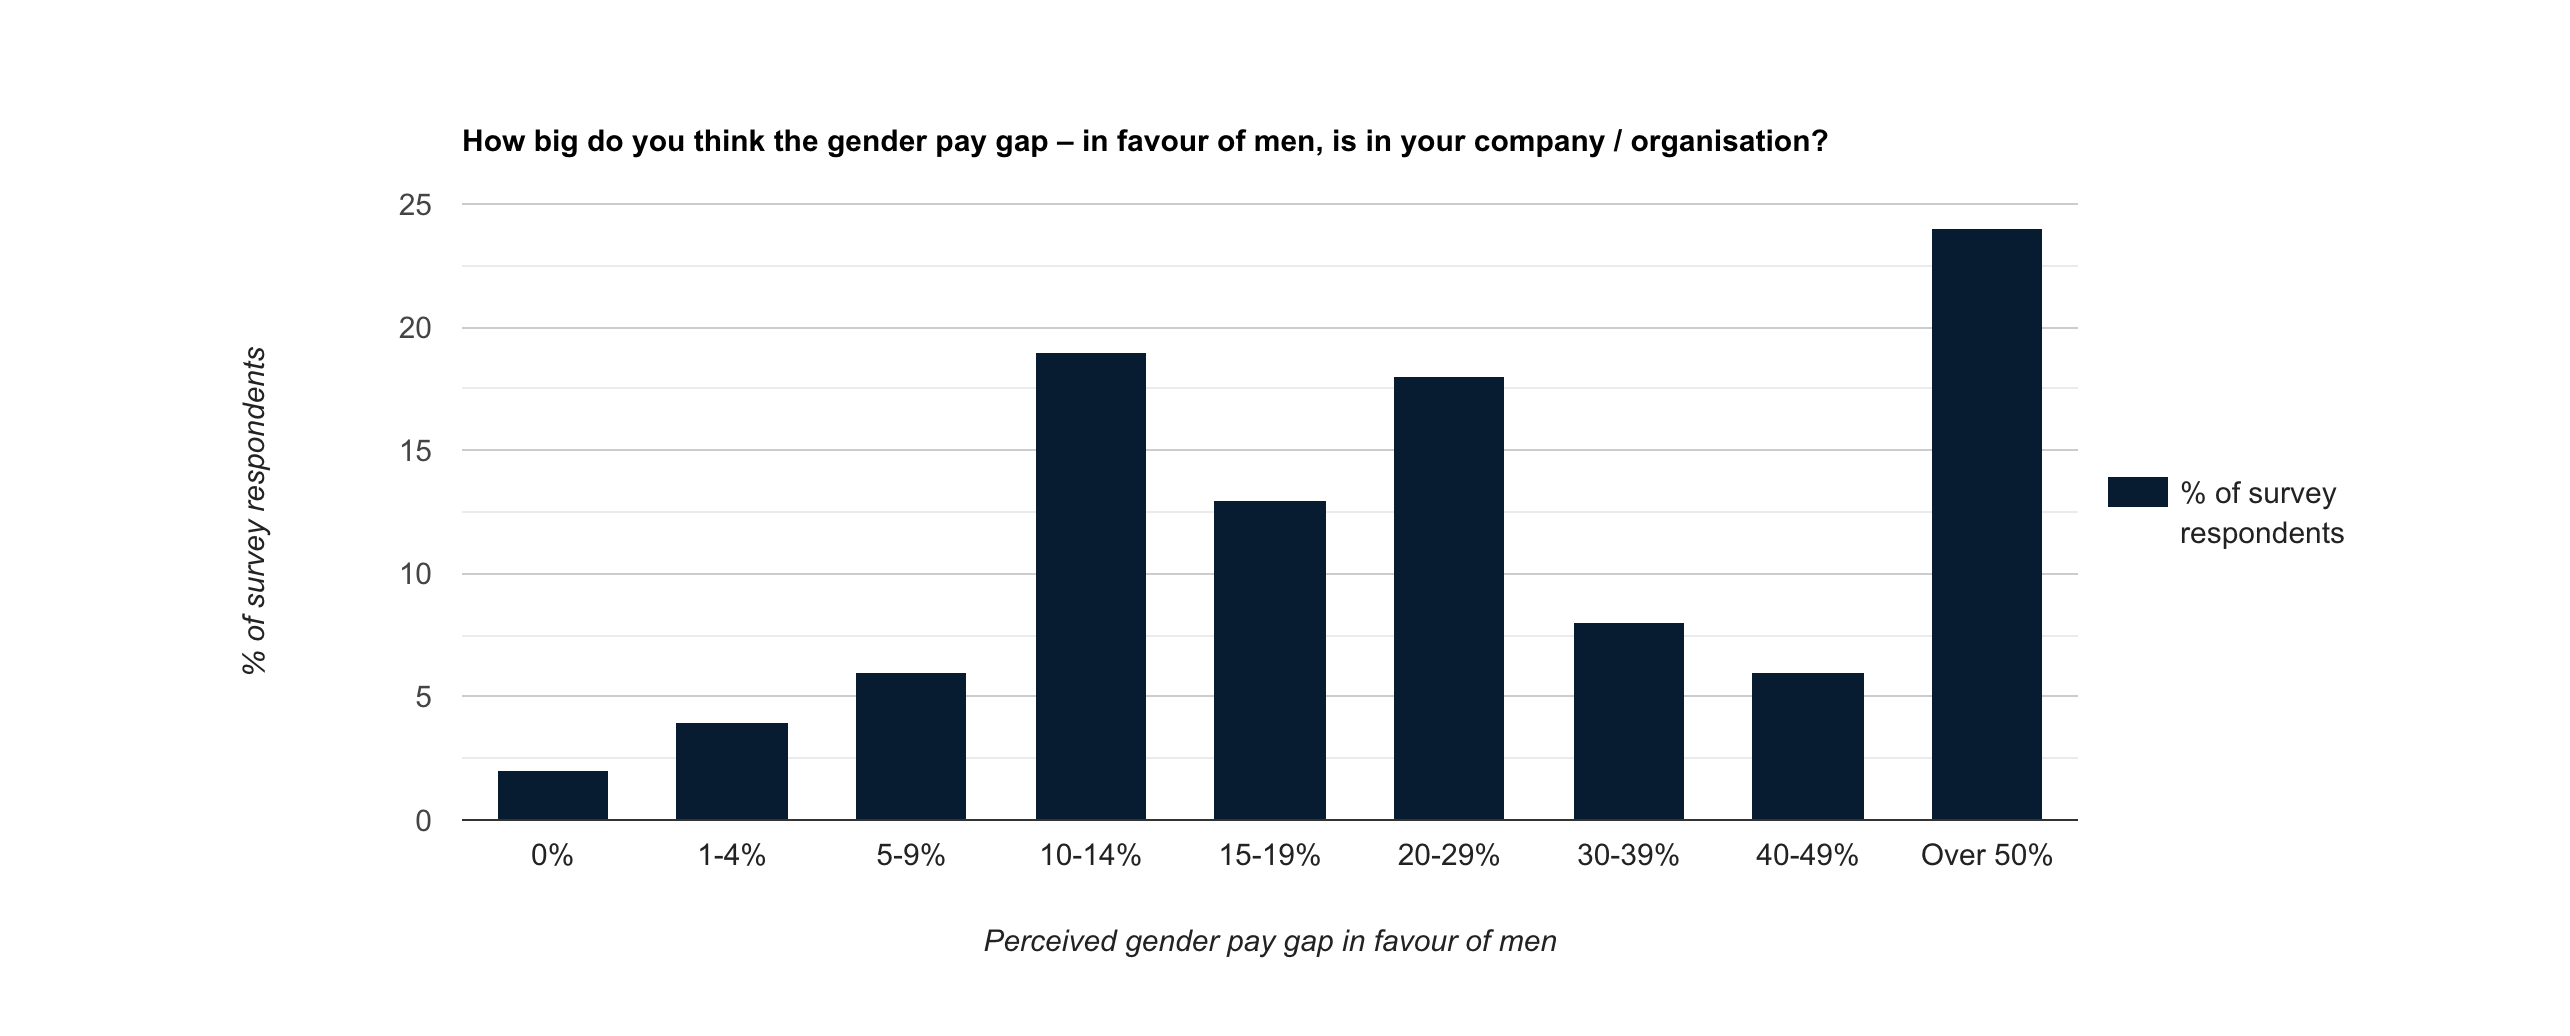 How big do you think the gender pay gap is in your organisation?